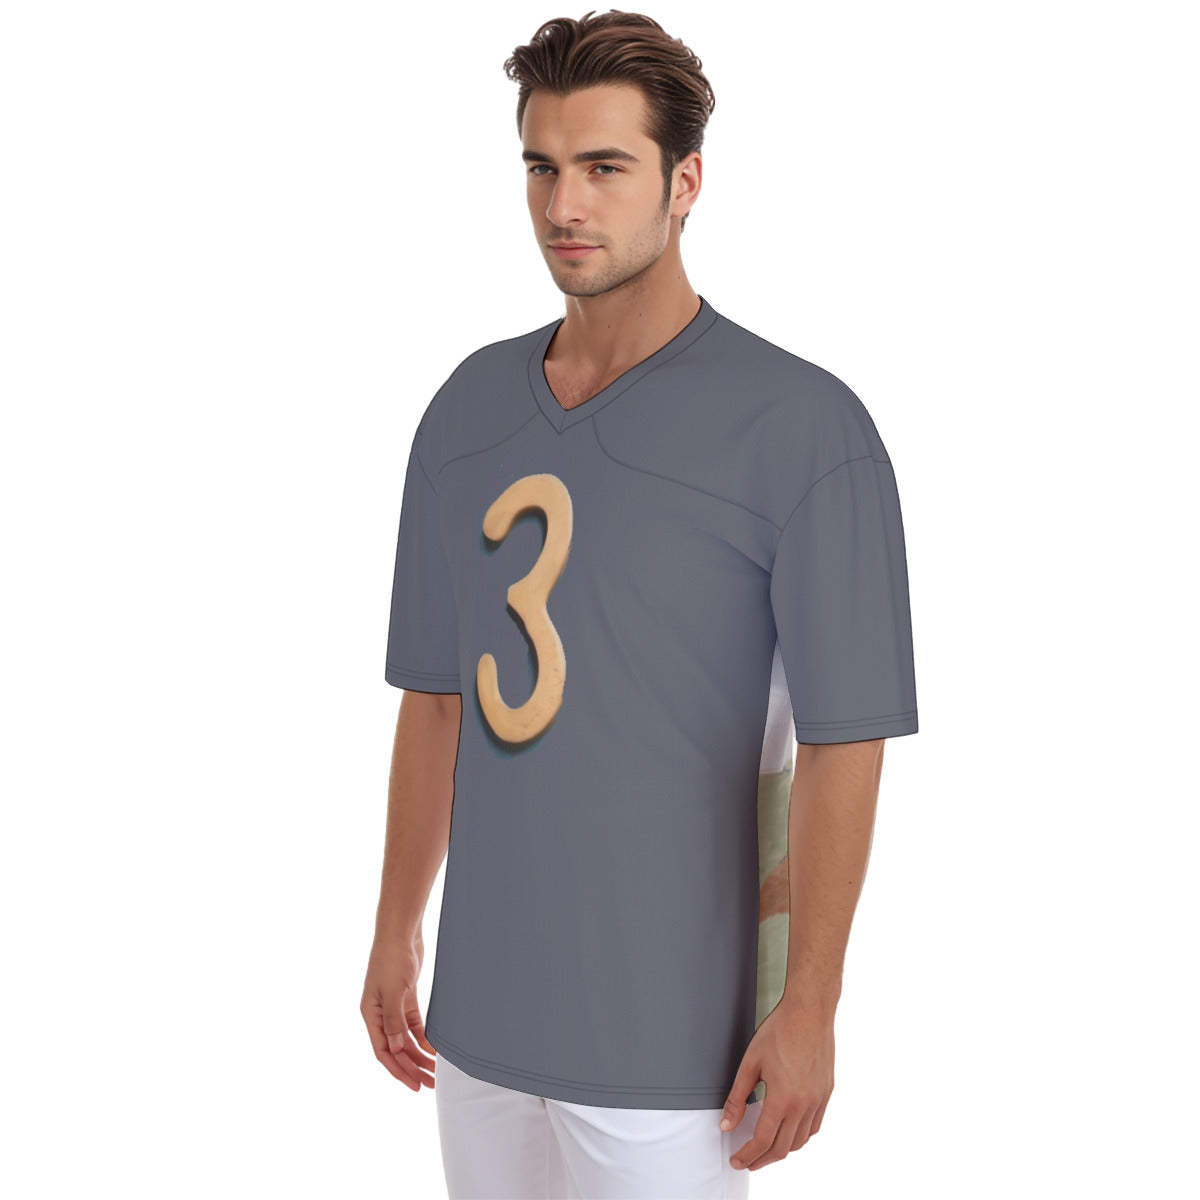 The Pitch -- Men's Football  Jersey